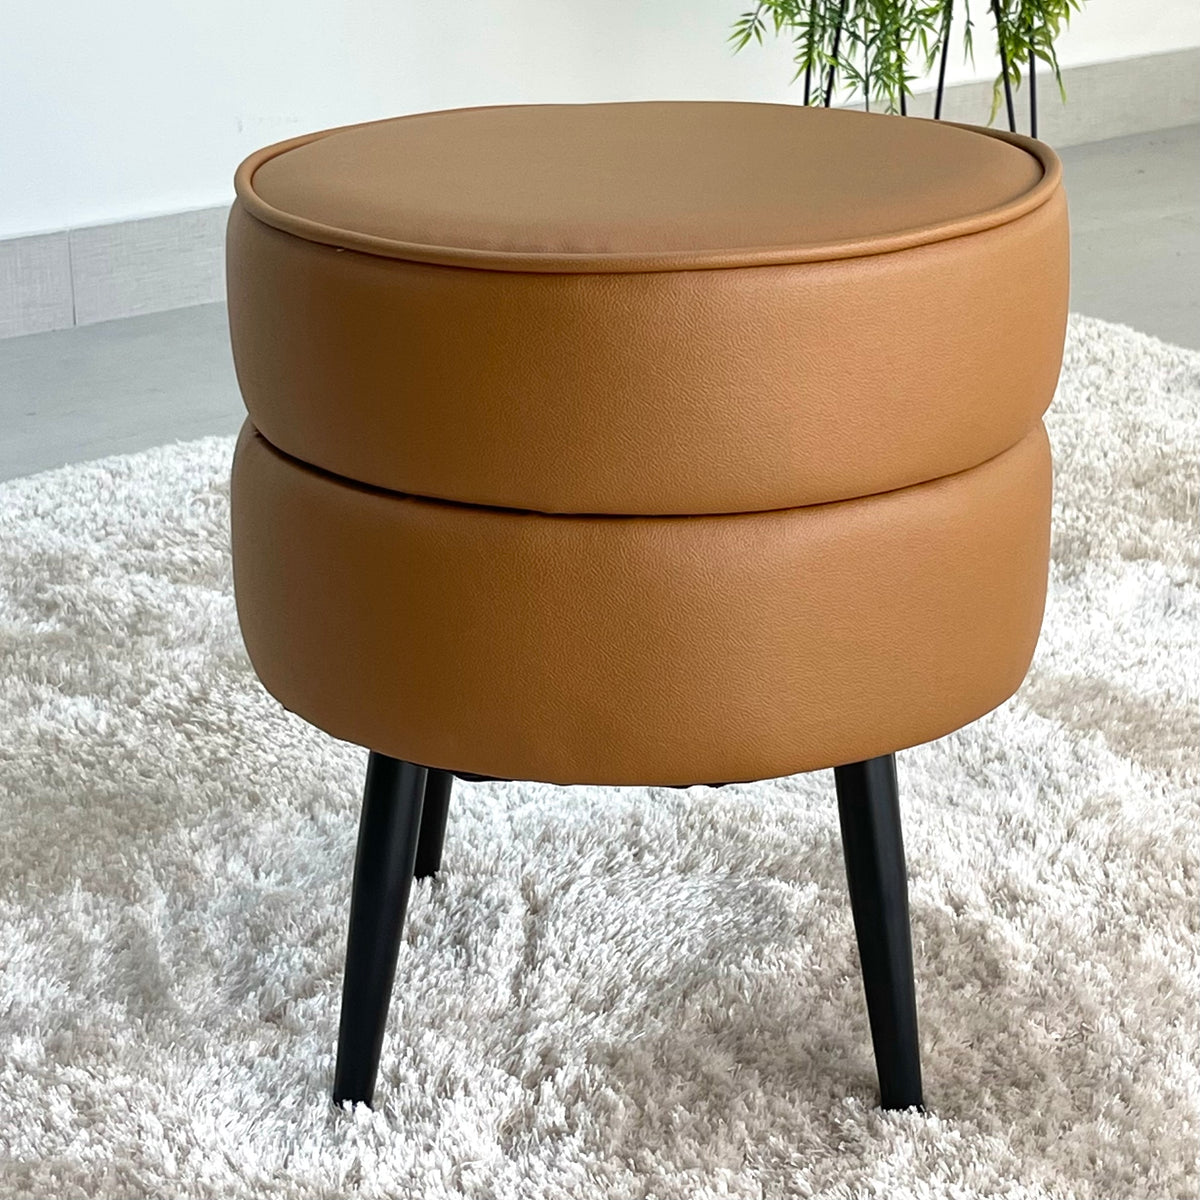 Faux Leather Camel Ottoman